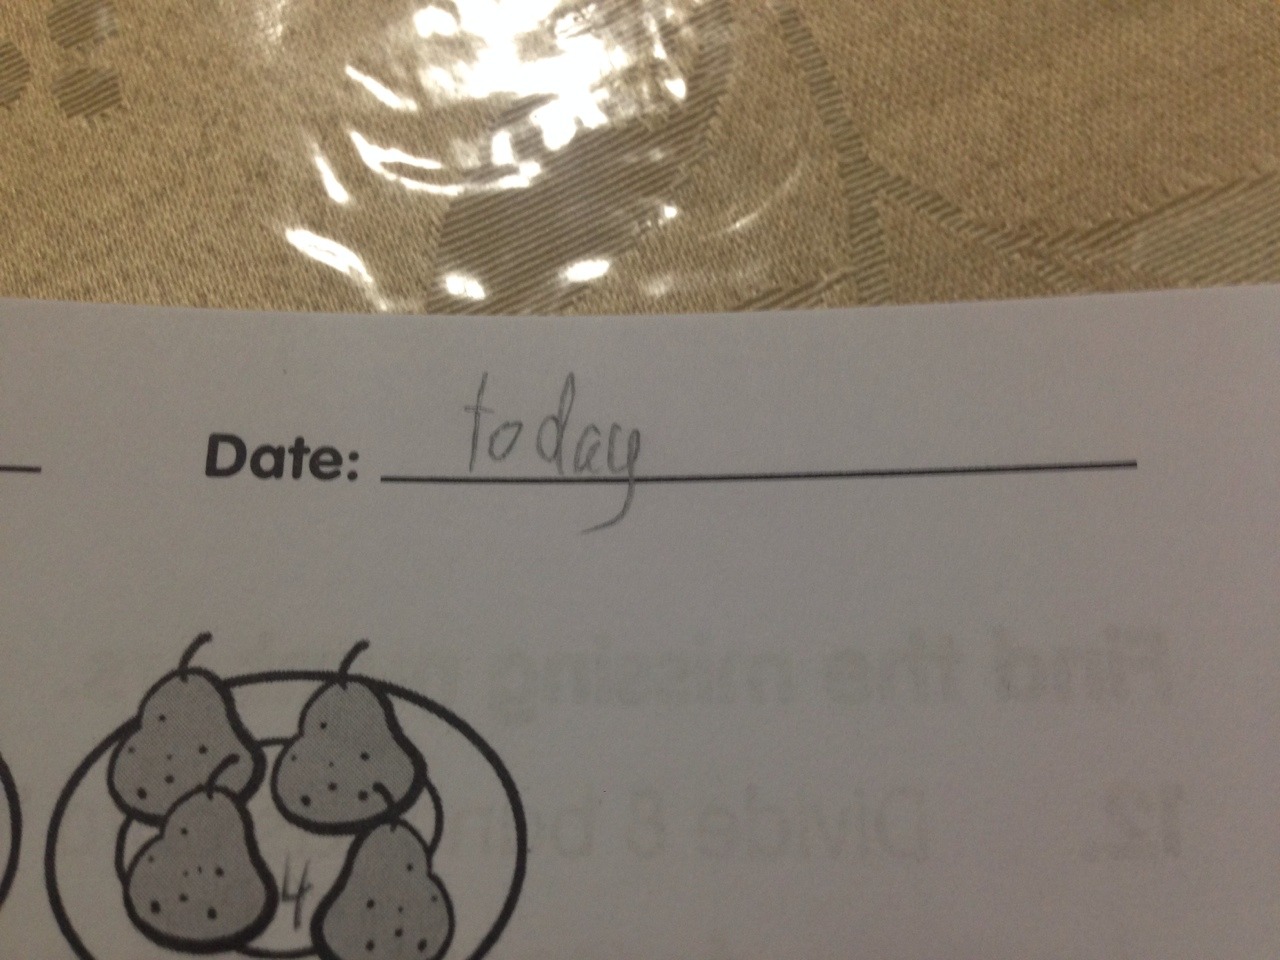 cartel:  MY SISTER WROTE TODAY AS THE DATE ON HER TEST, OMG